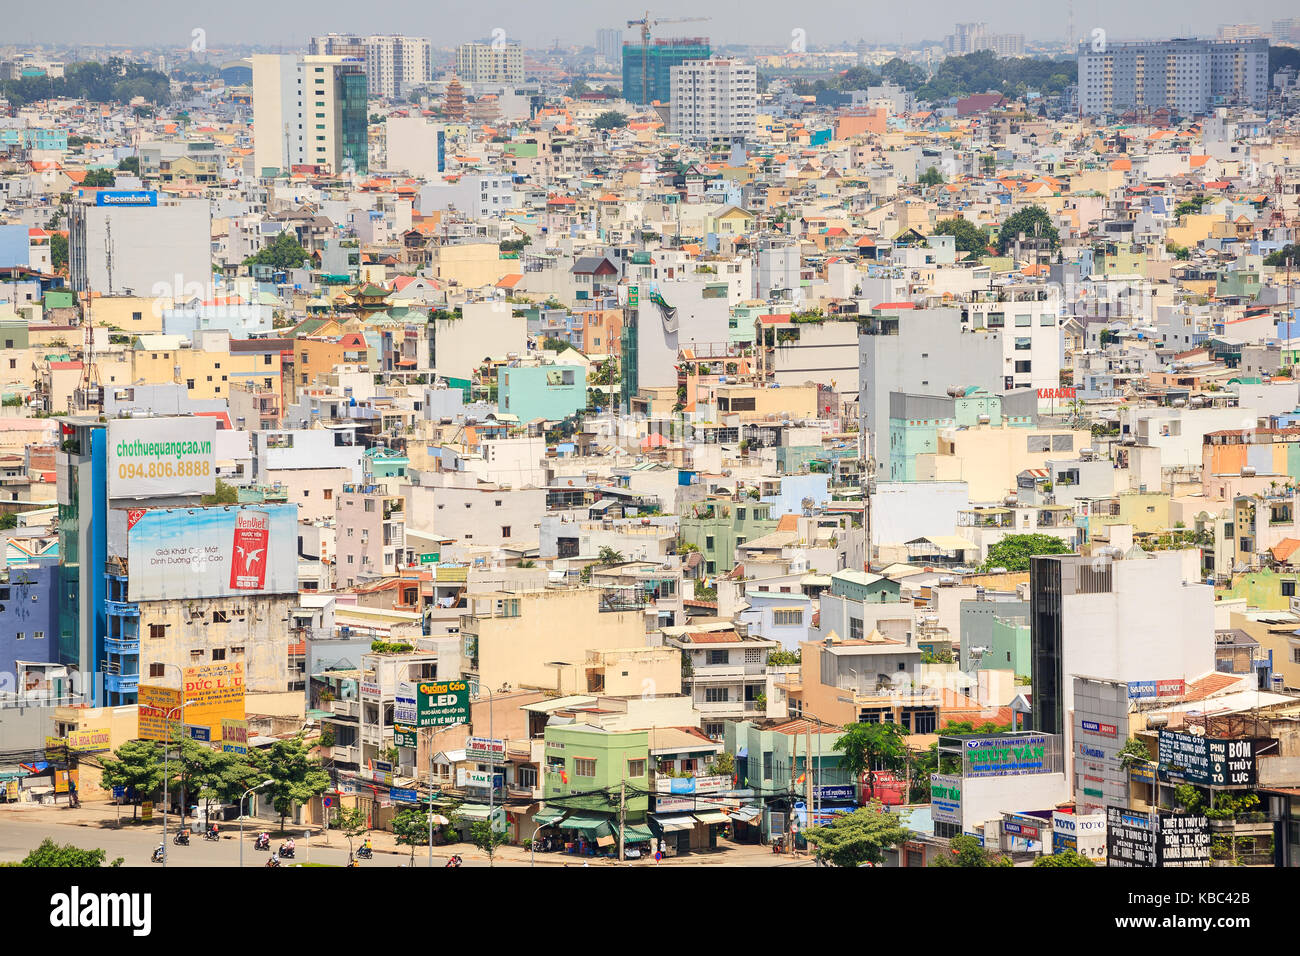 Ho Chi Minh city (or Saigon) skyline with colorful house, Vietnam. Saigon is the biggest city and economic center in Vietnam. Stock Photo